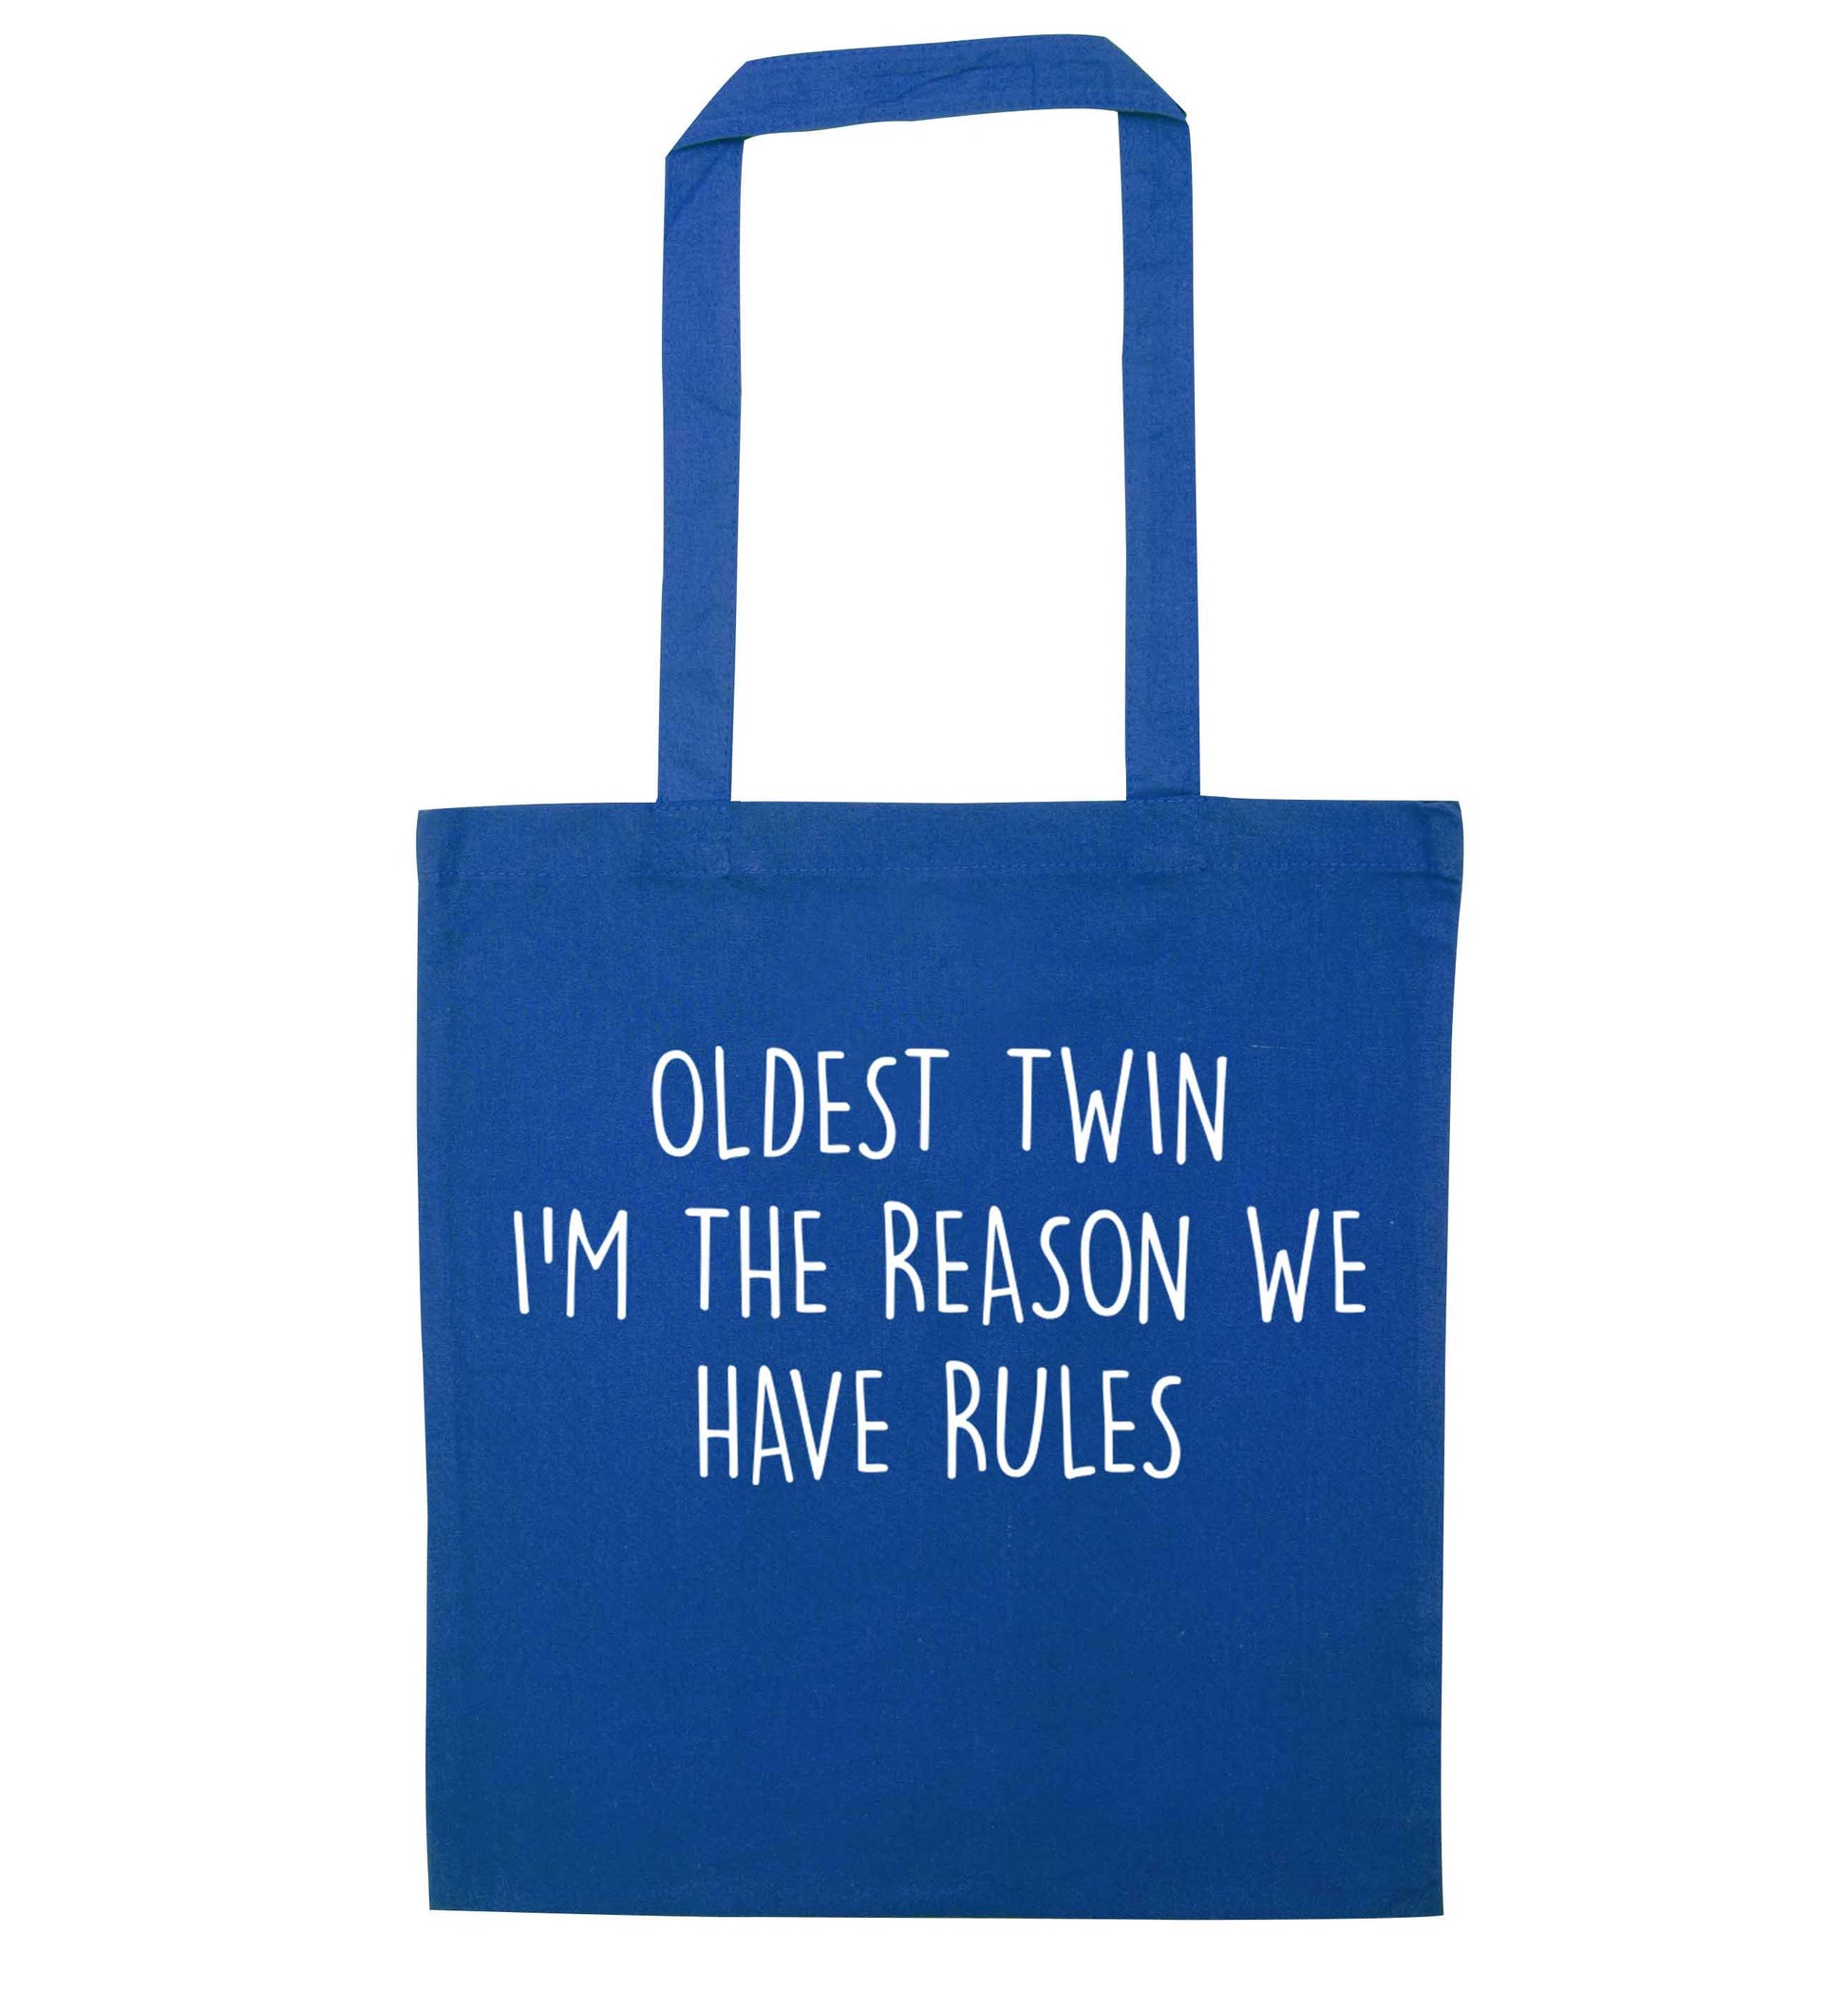 Oldest twin I'm the reason we have rules blue tote bag